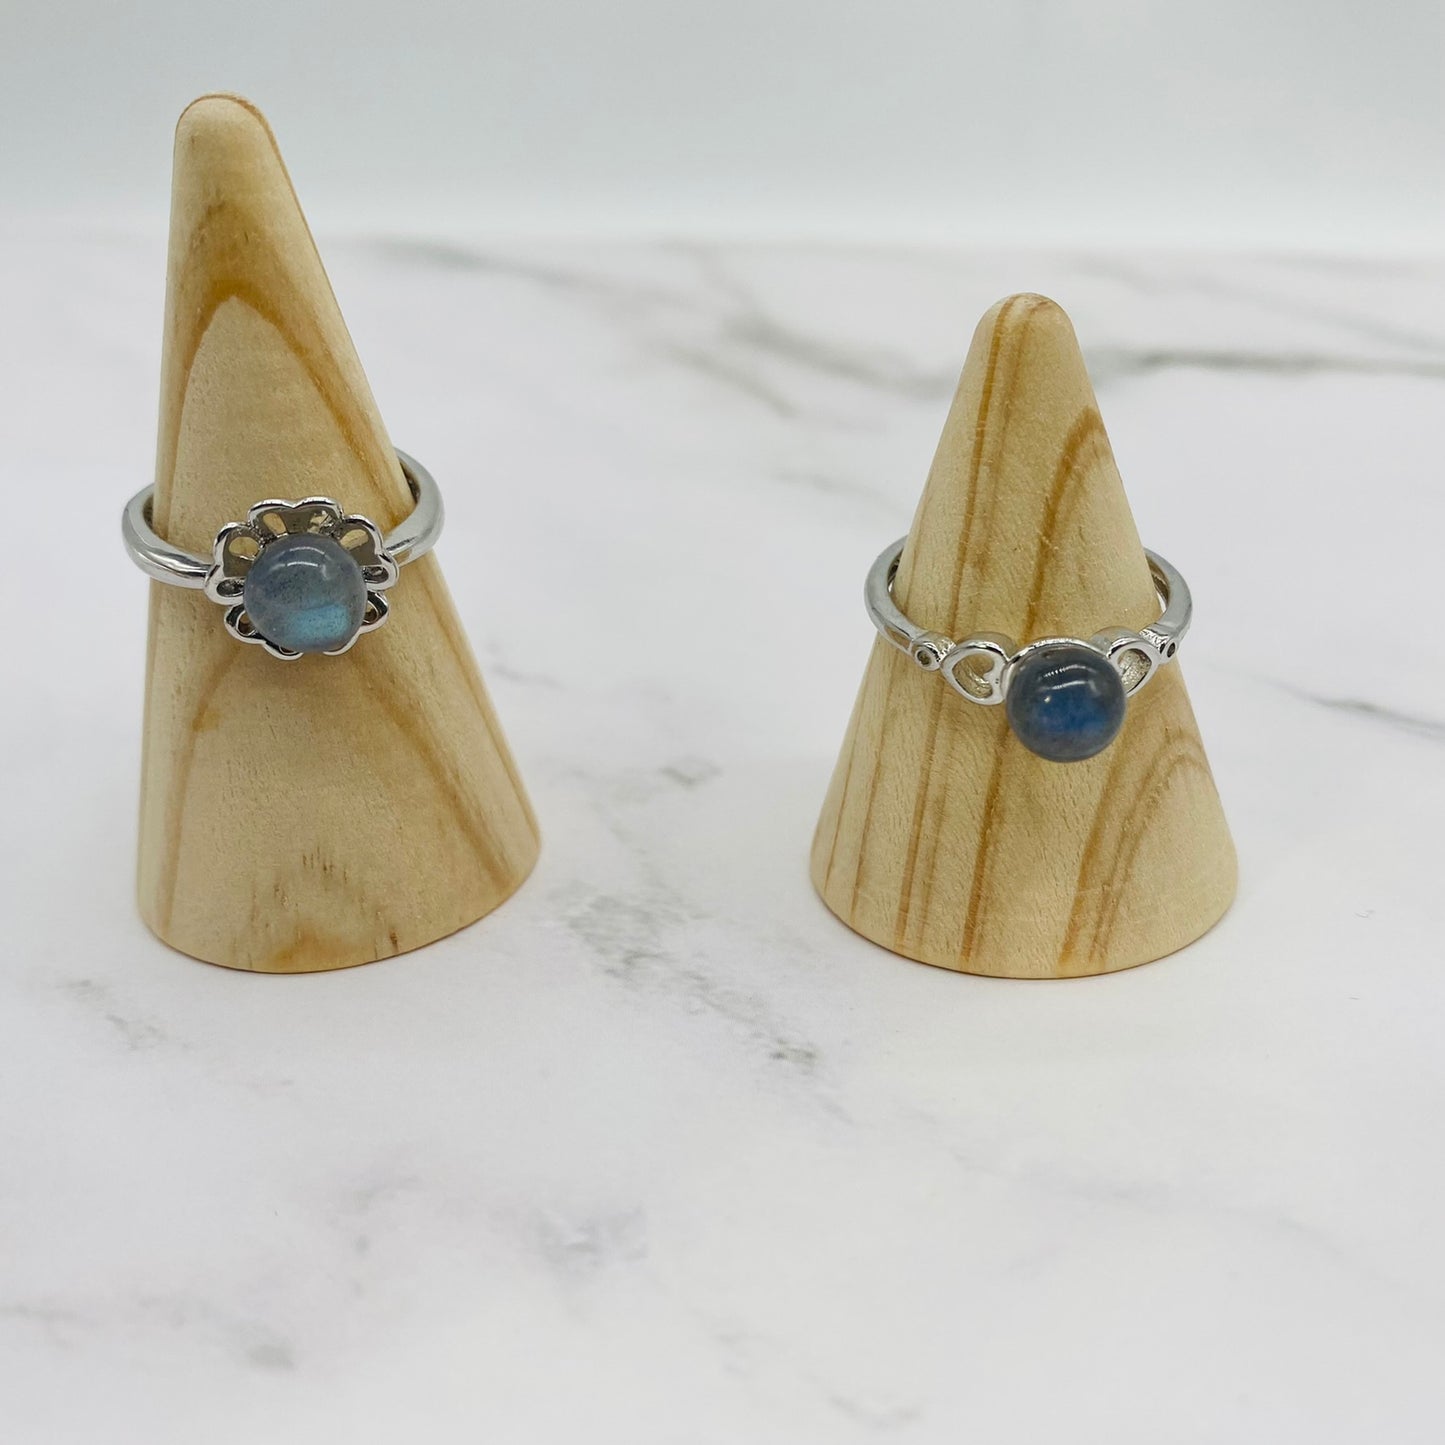 Stackable Crystal Ring, Statement Ring, Handmade Rings, Birthstone Rings, Labradorite Silver Rings, Stone Ring, Gift For Her,